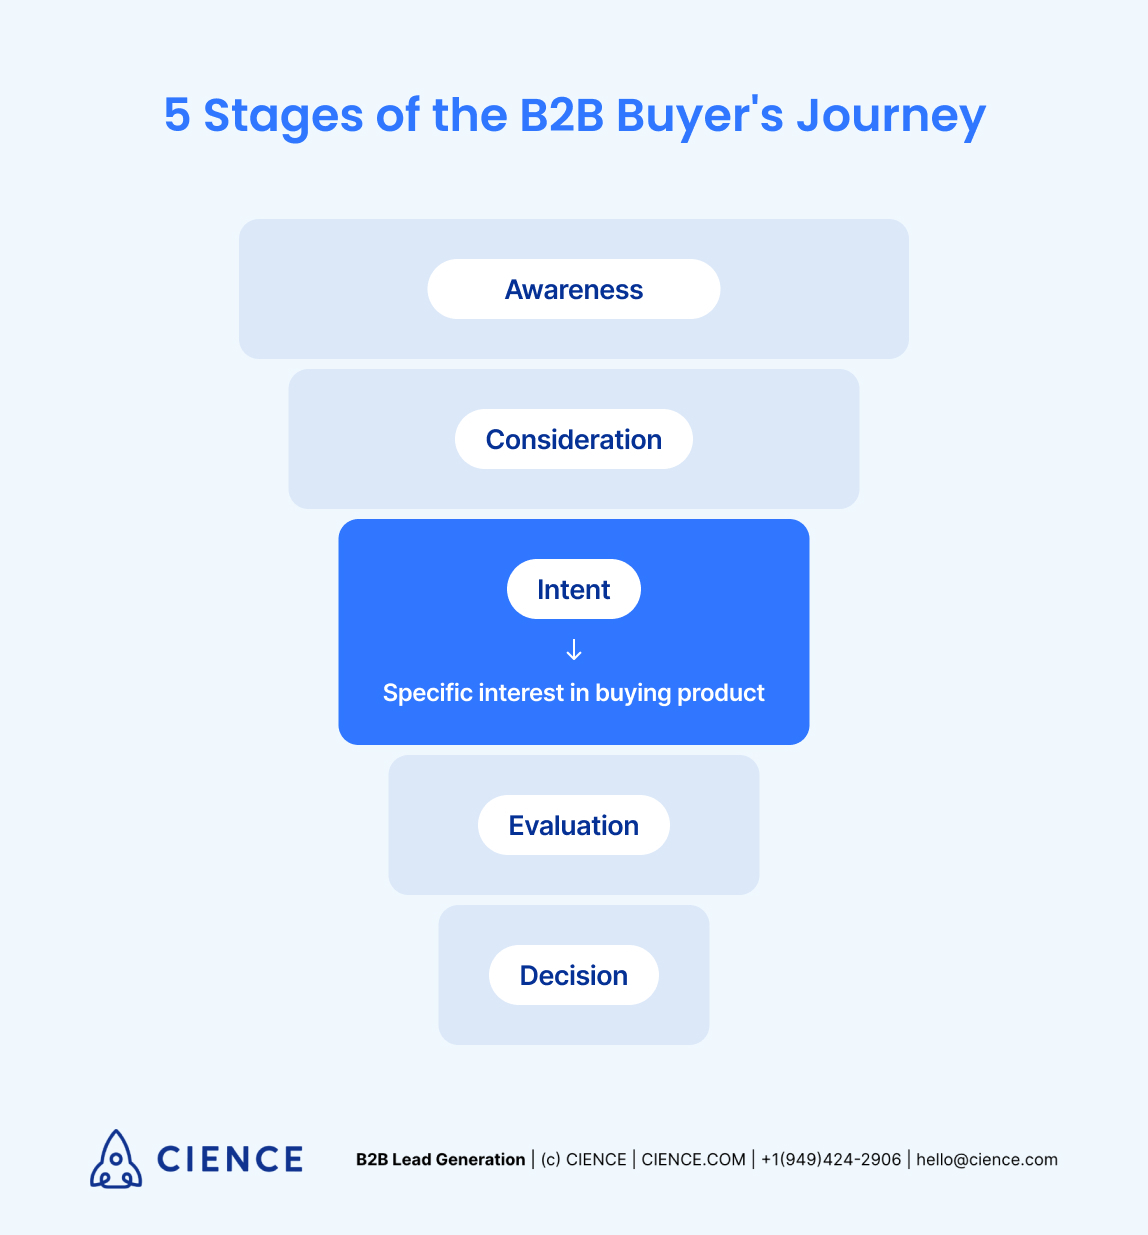 5 Stages of the B2B Buyer's Journey